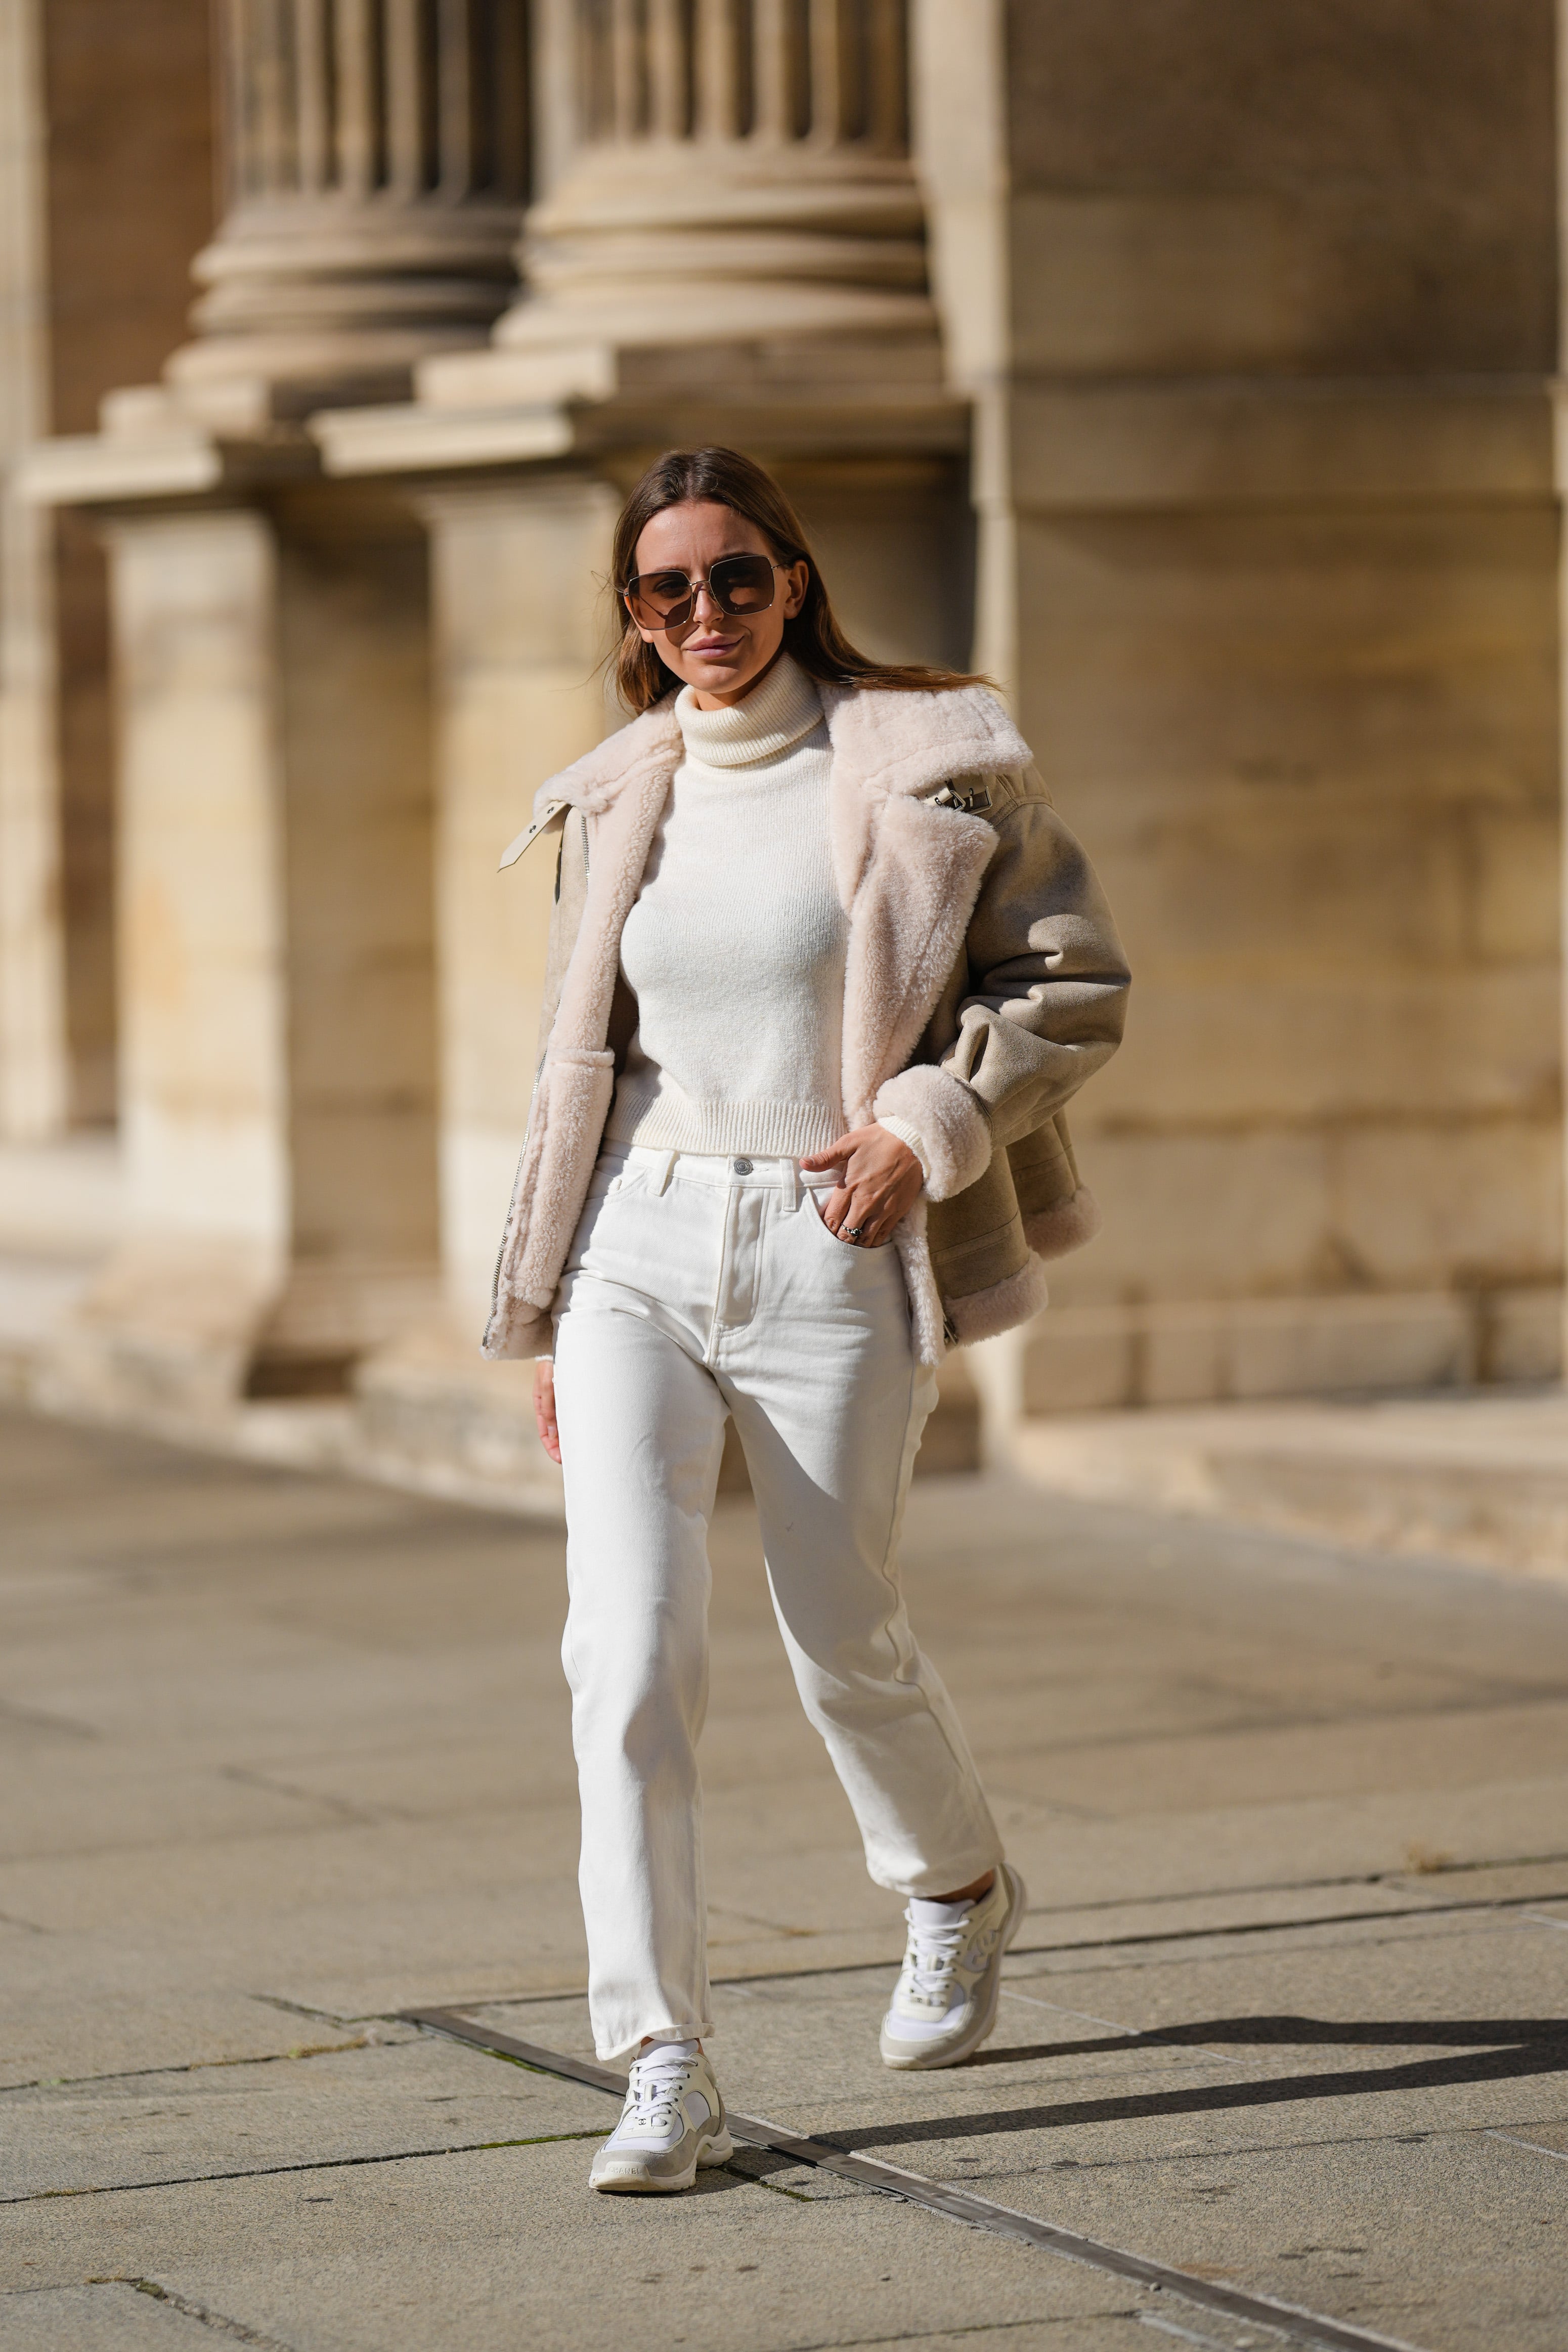 How to Wear White Pants in the Winter